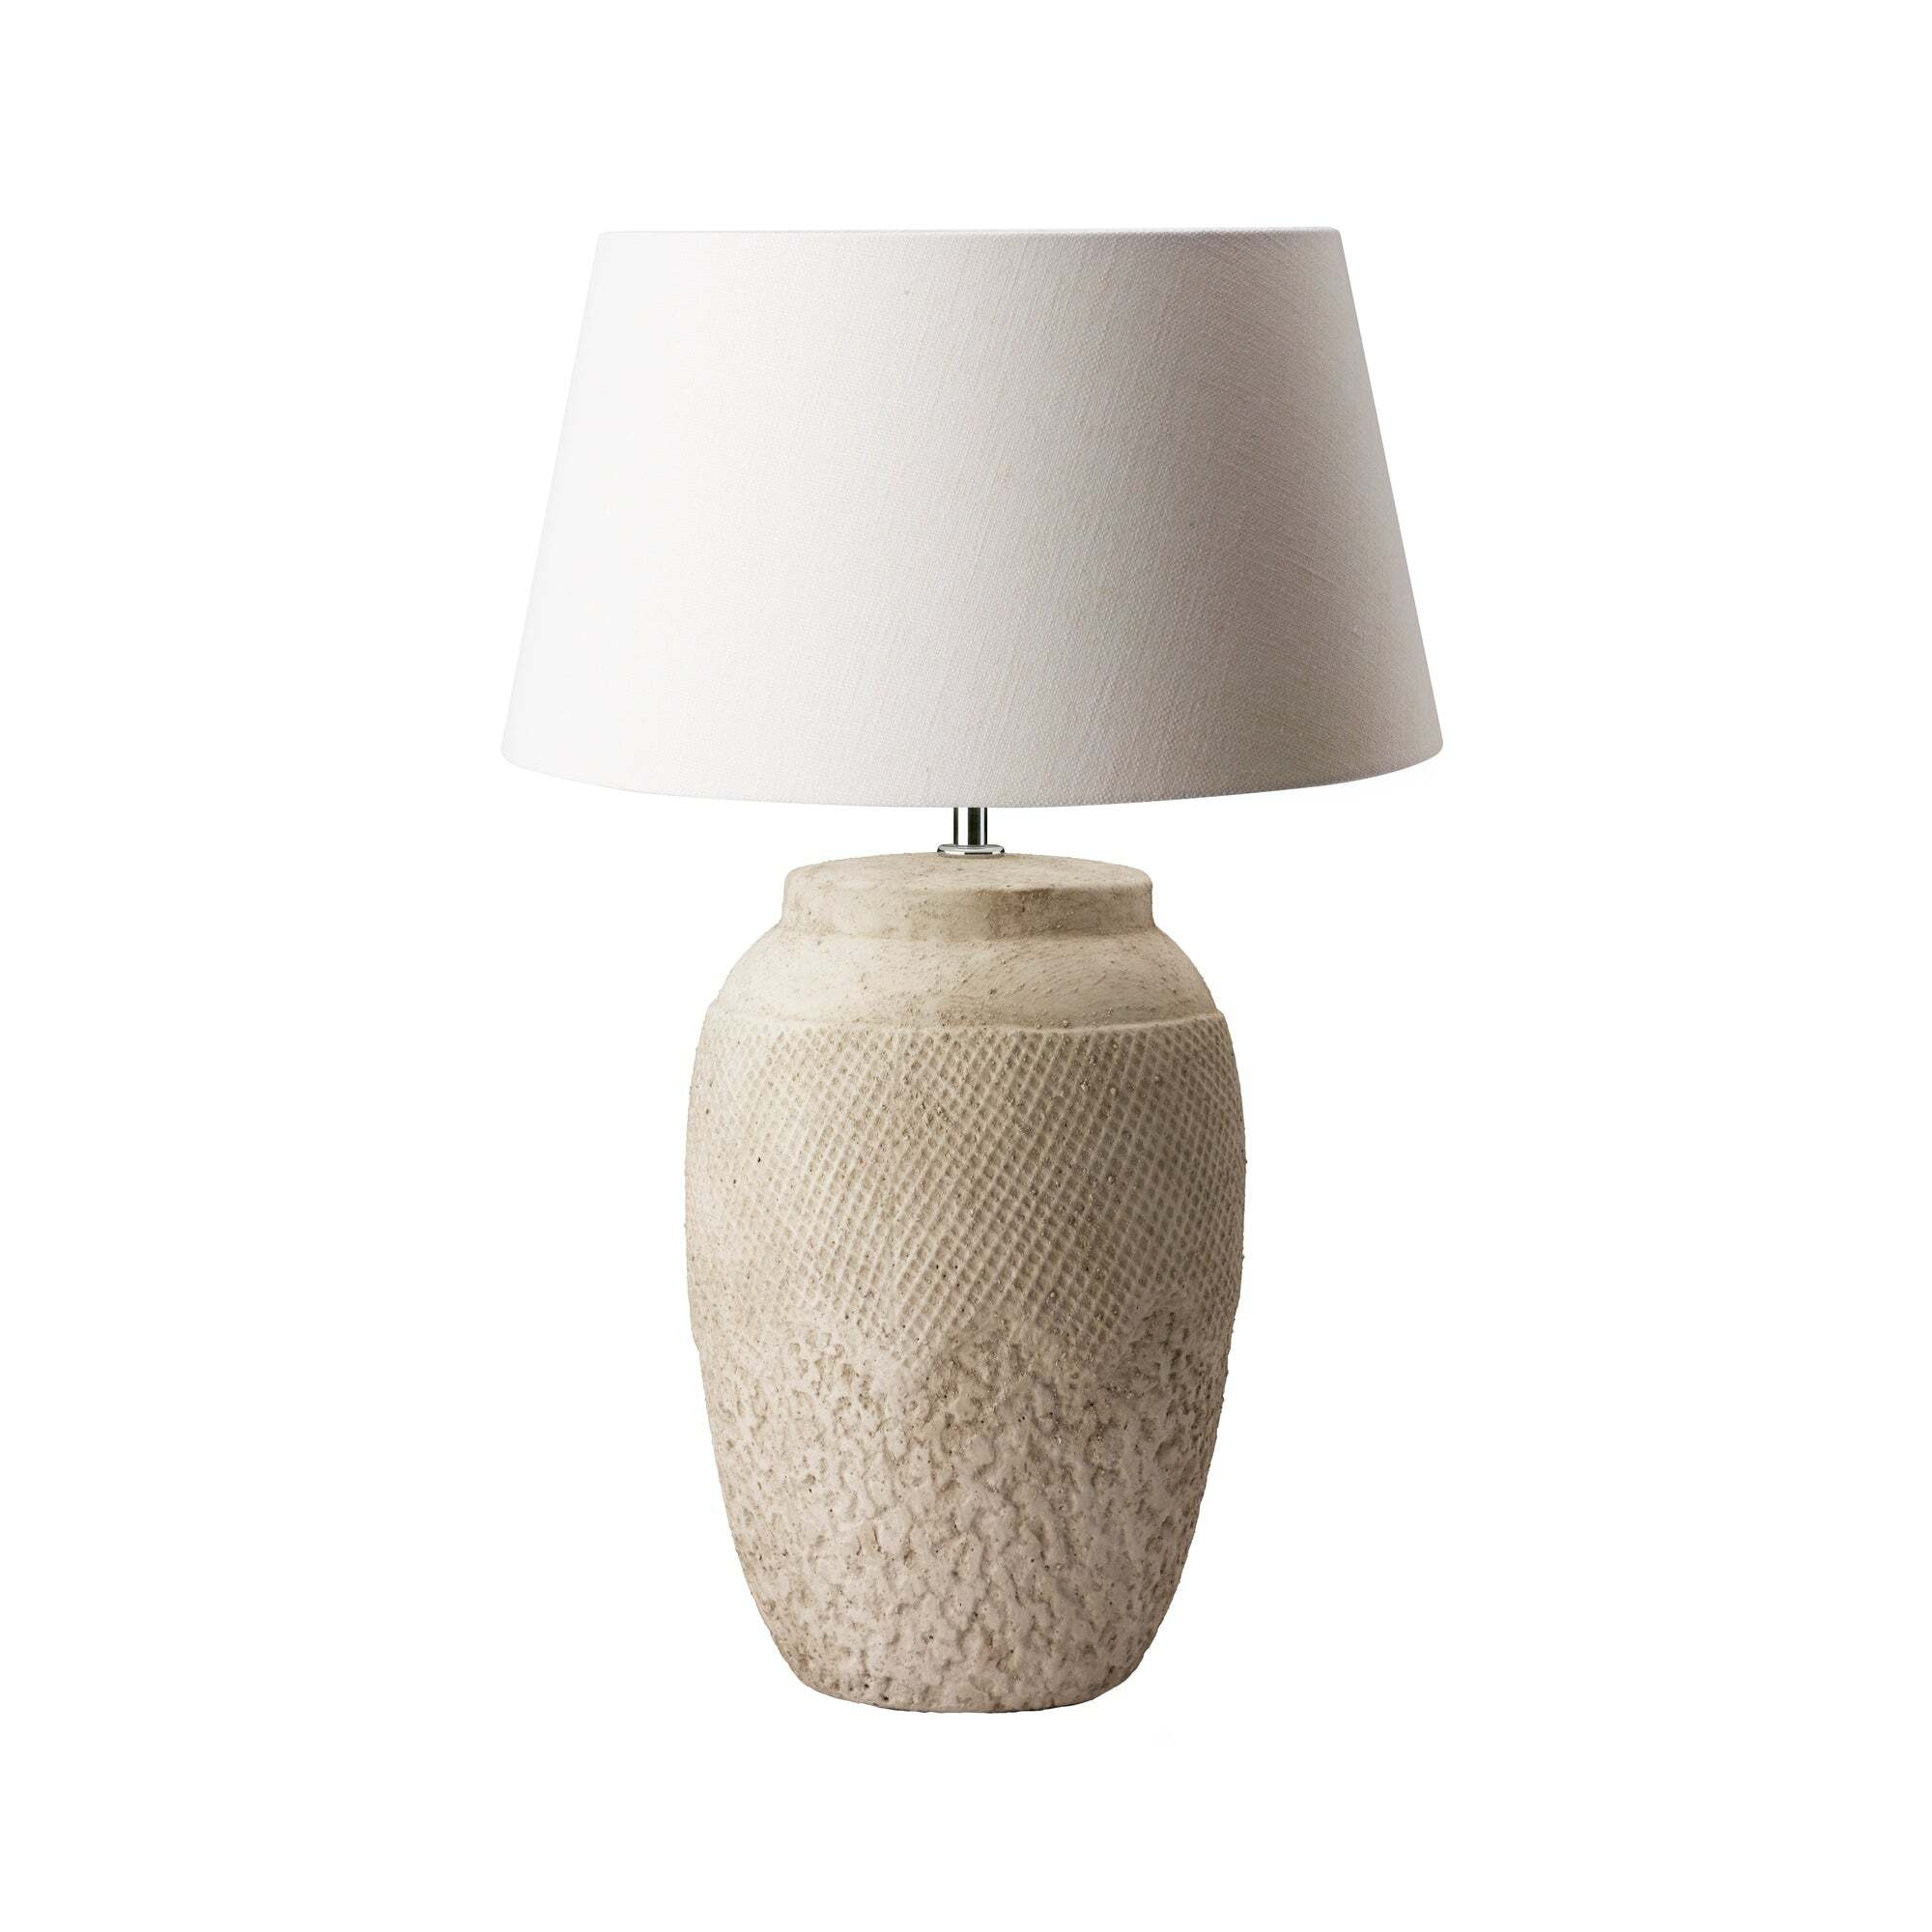 Large Neutral Textured Lamp